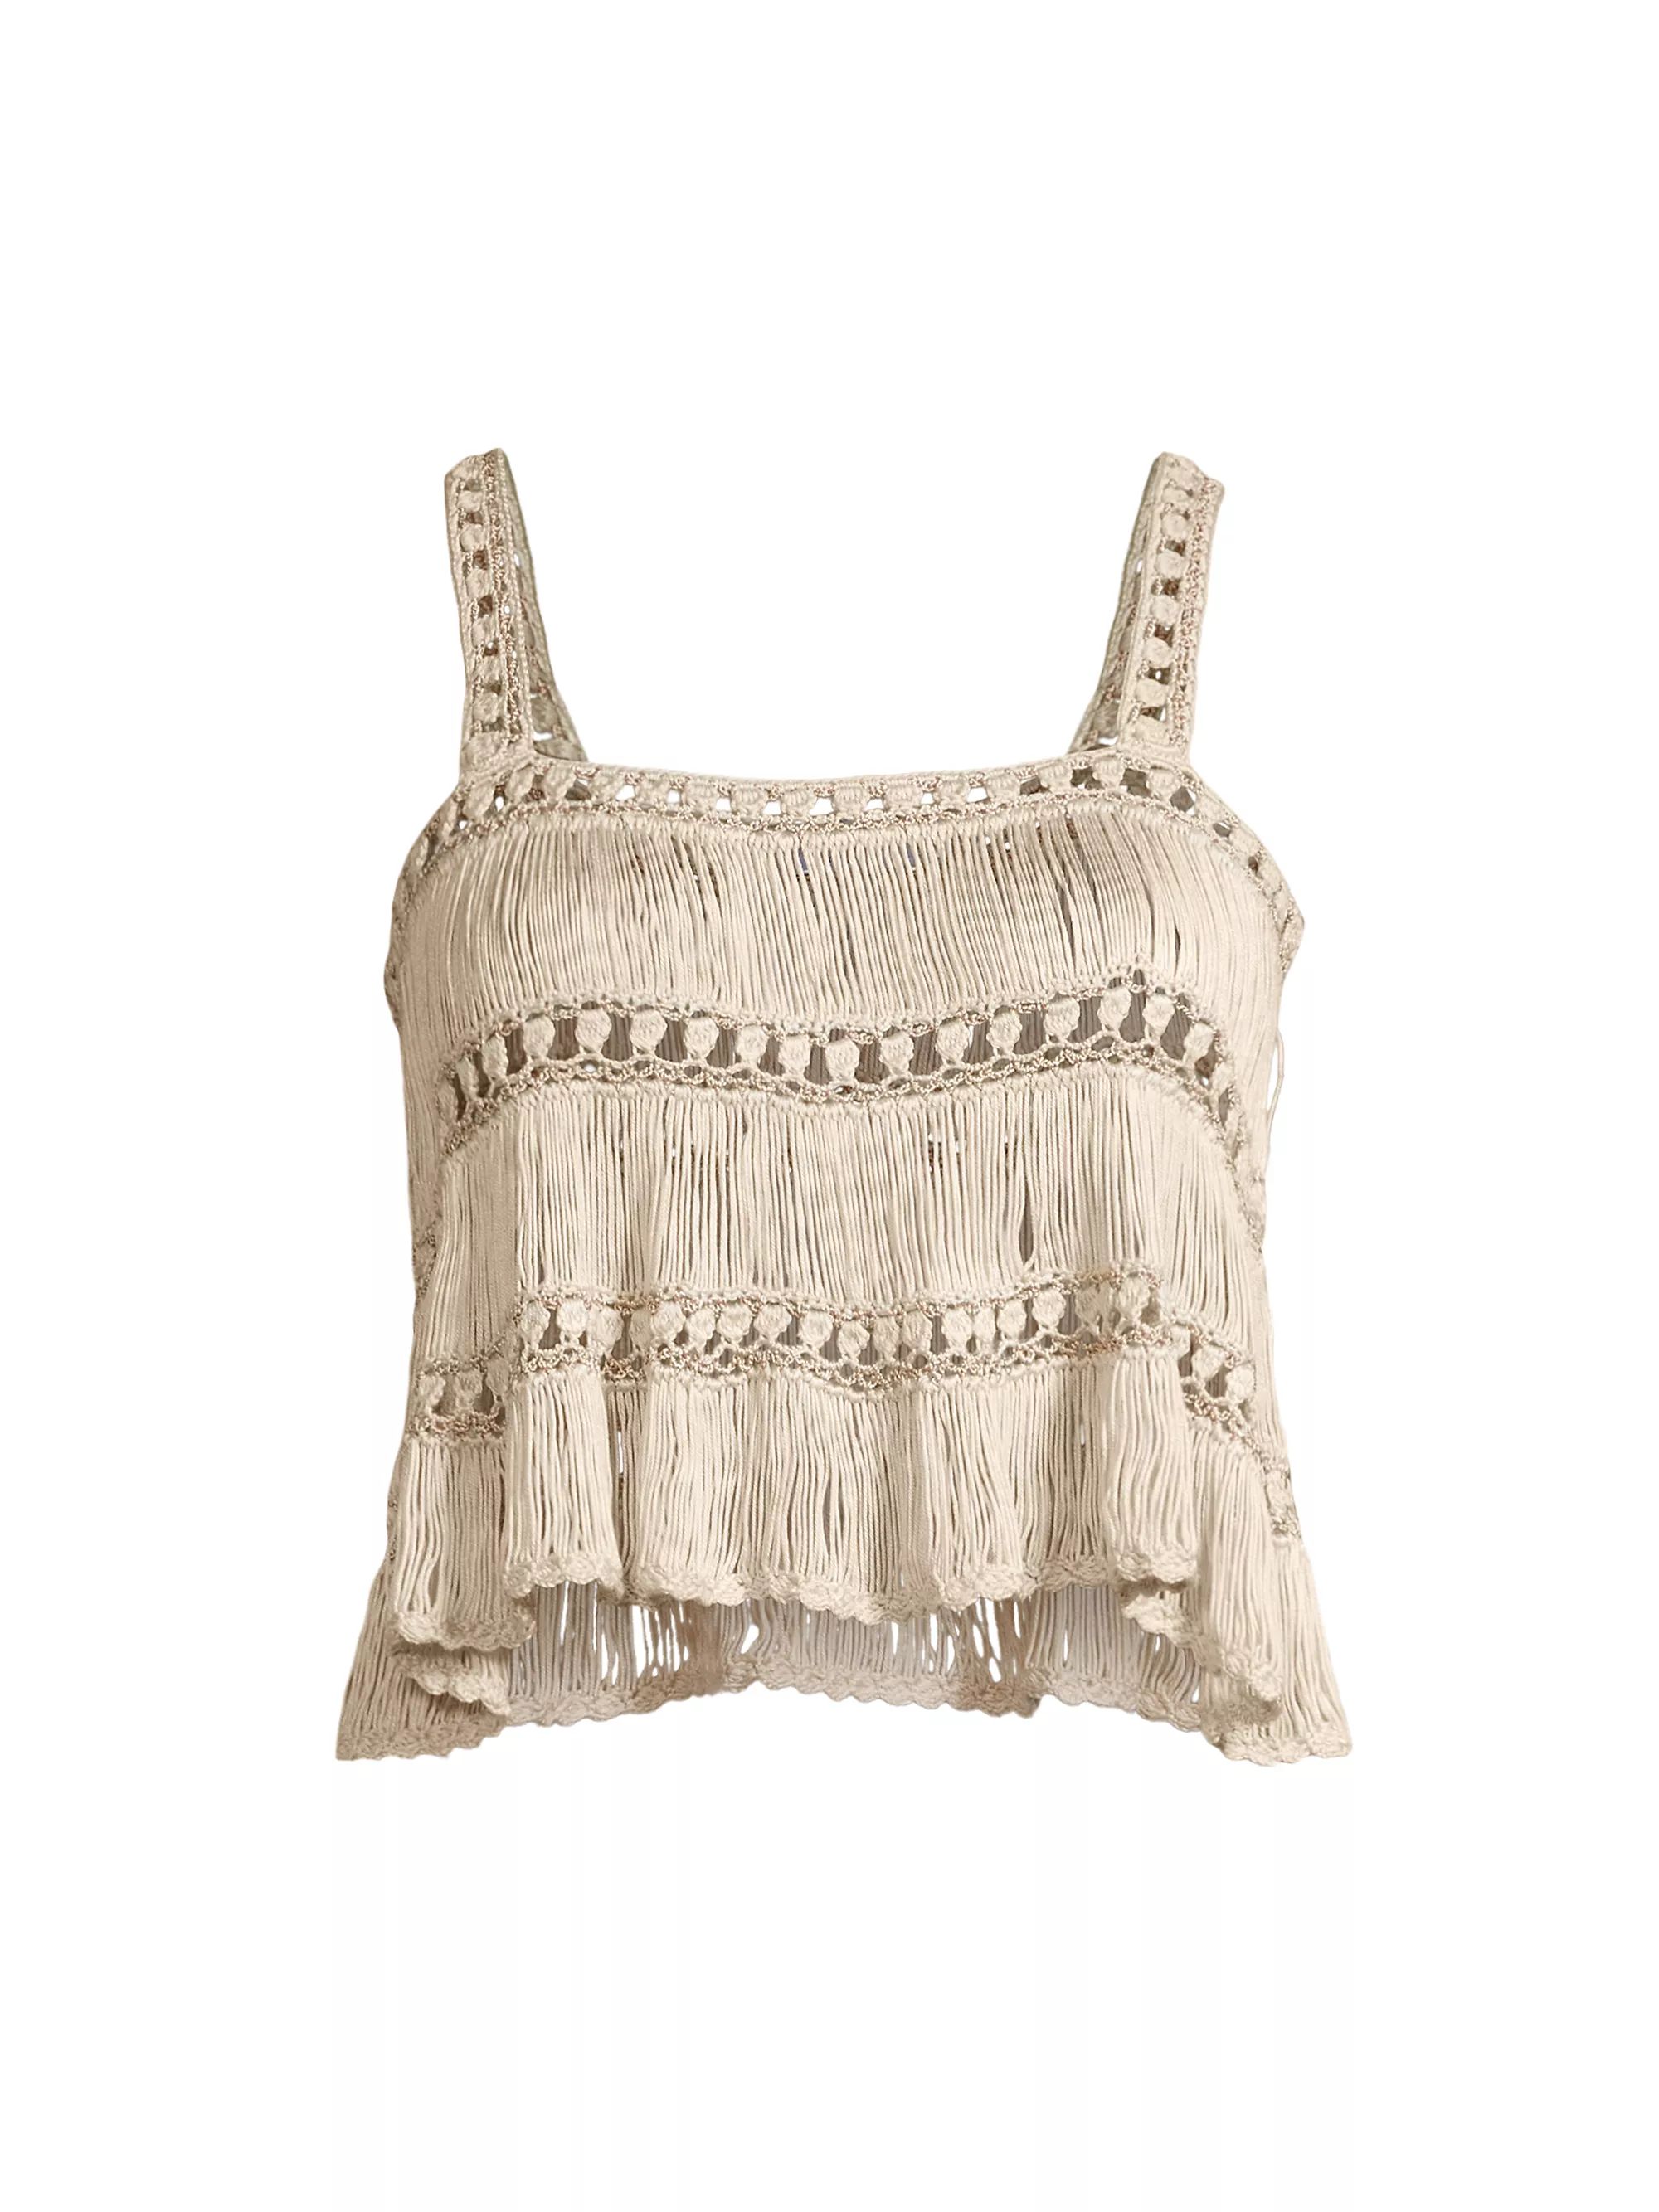 Shop My Beachy Side Colorblocked Hand-Crocheted Halter Top | Saks Fifth Avenue | Saks Fifth Avenue